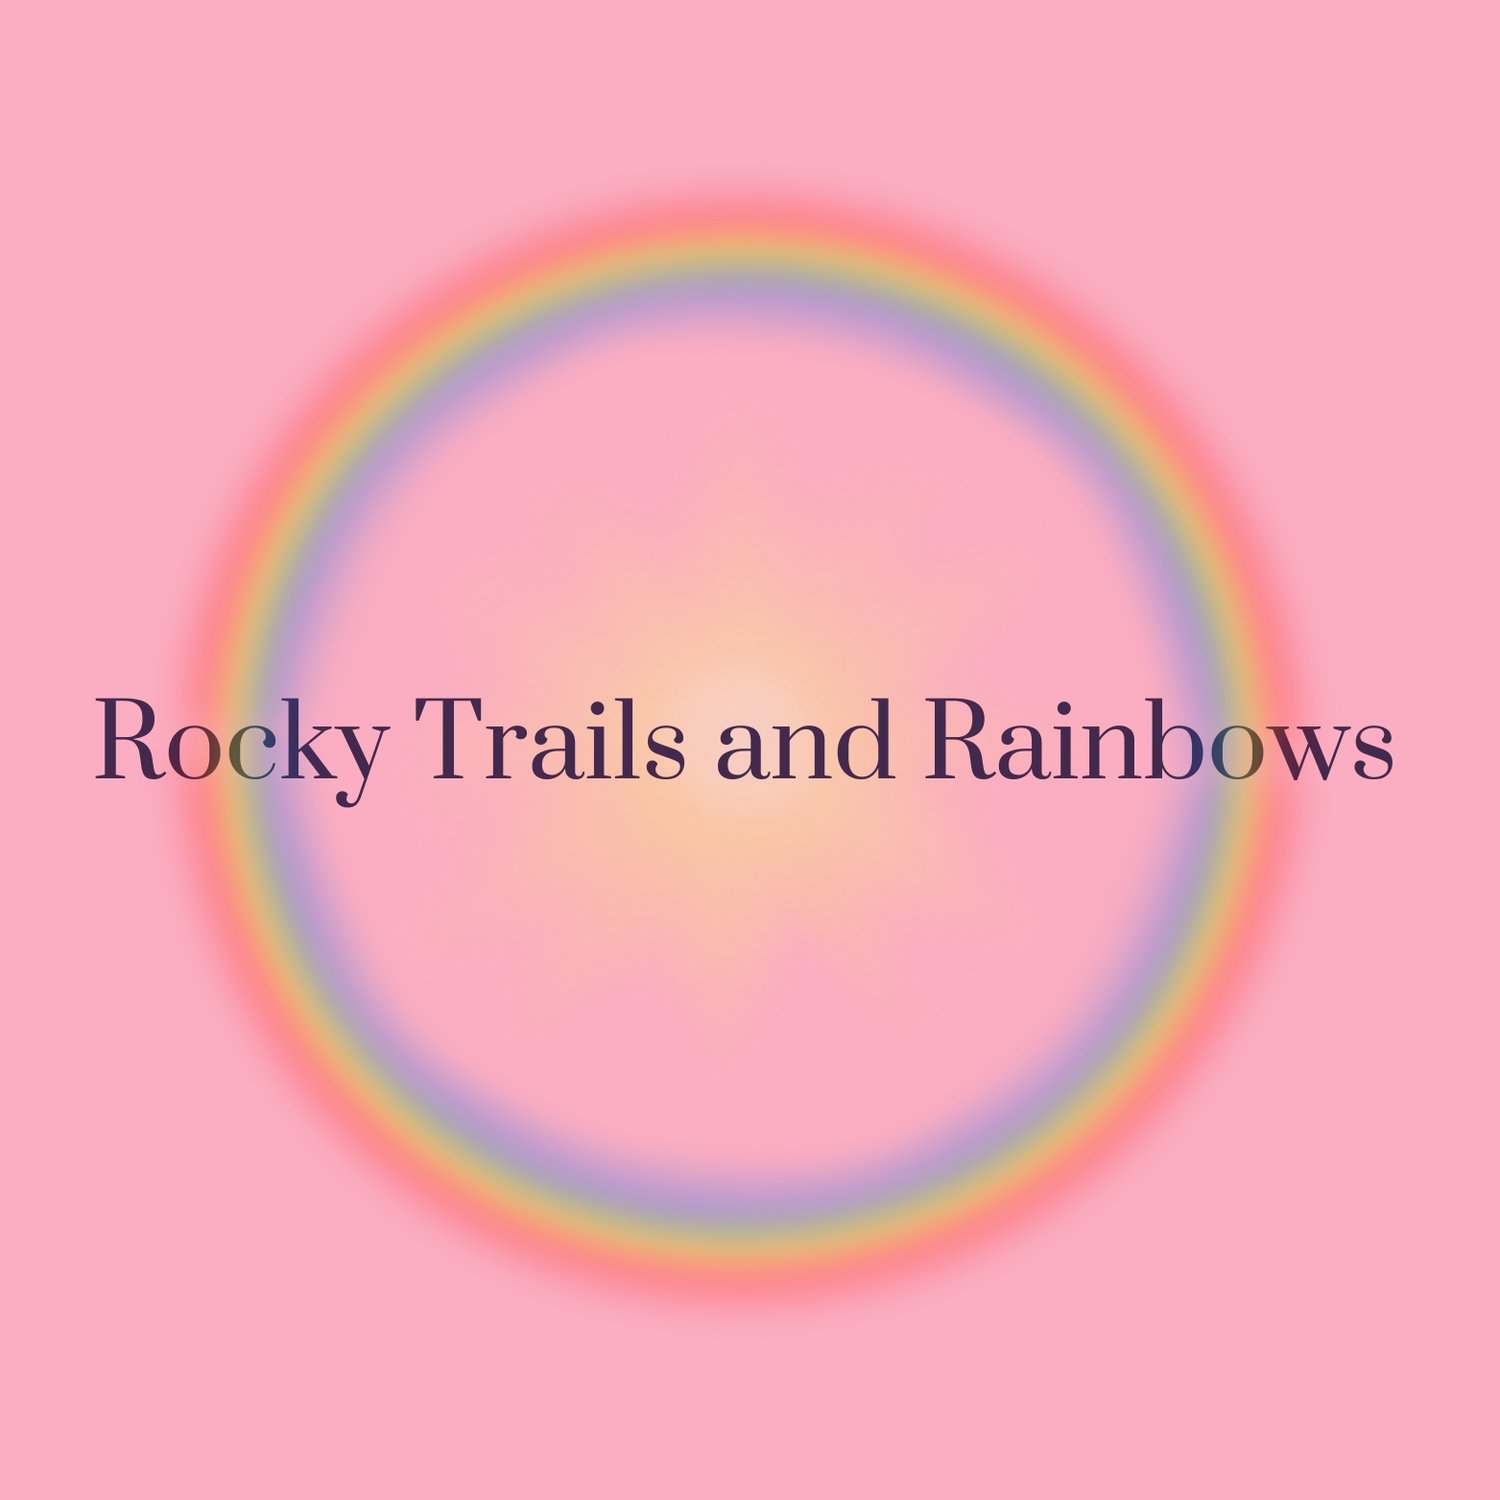 Rocky Trails and Rainbows